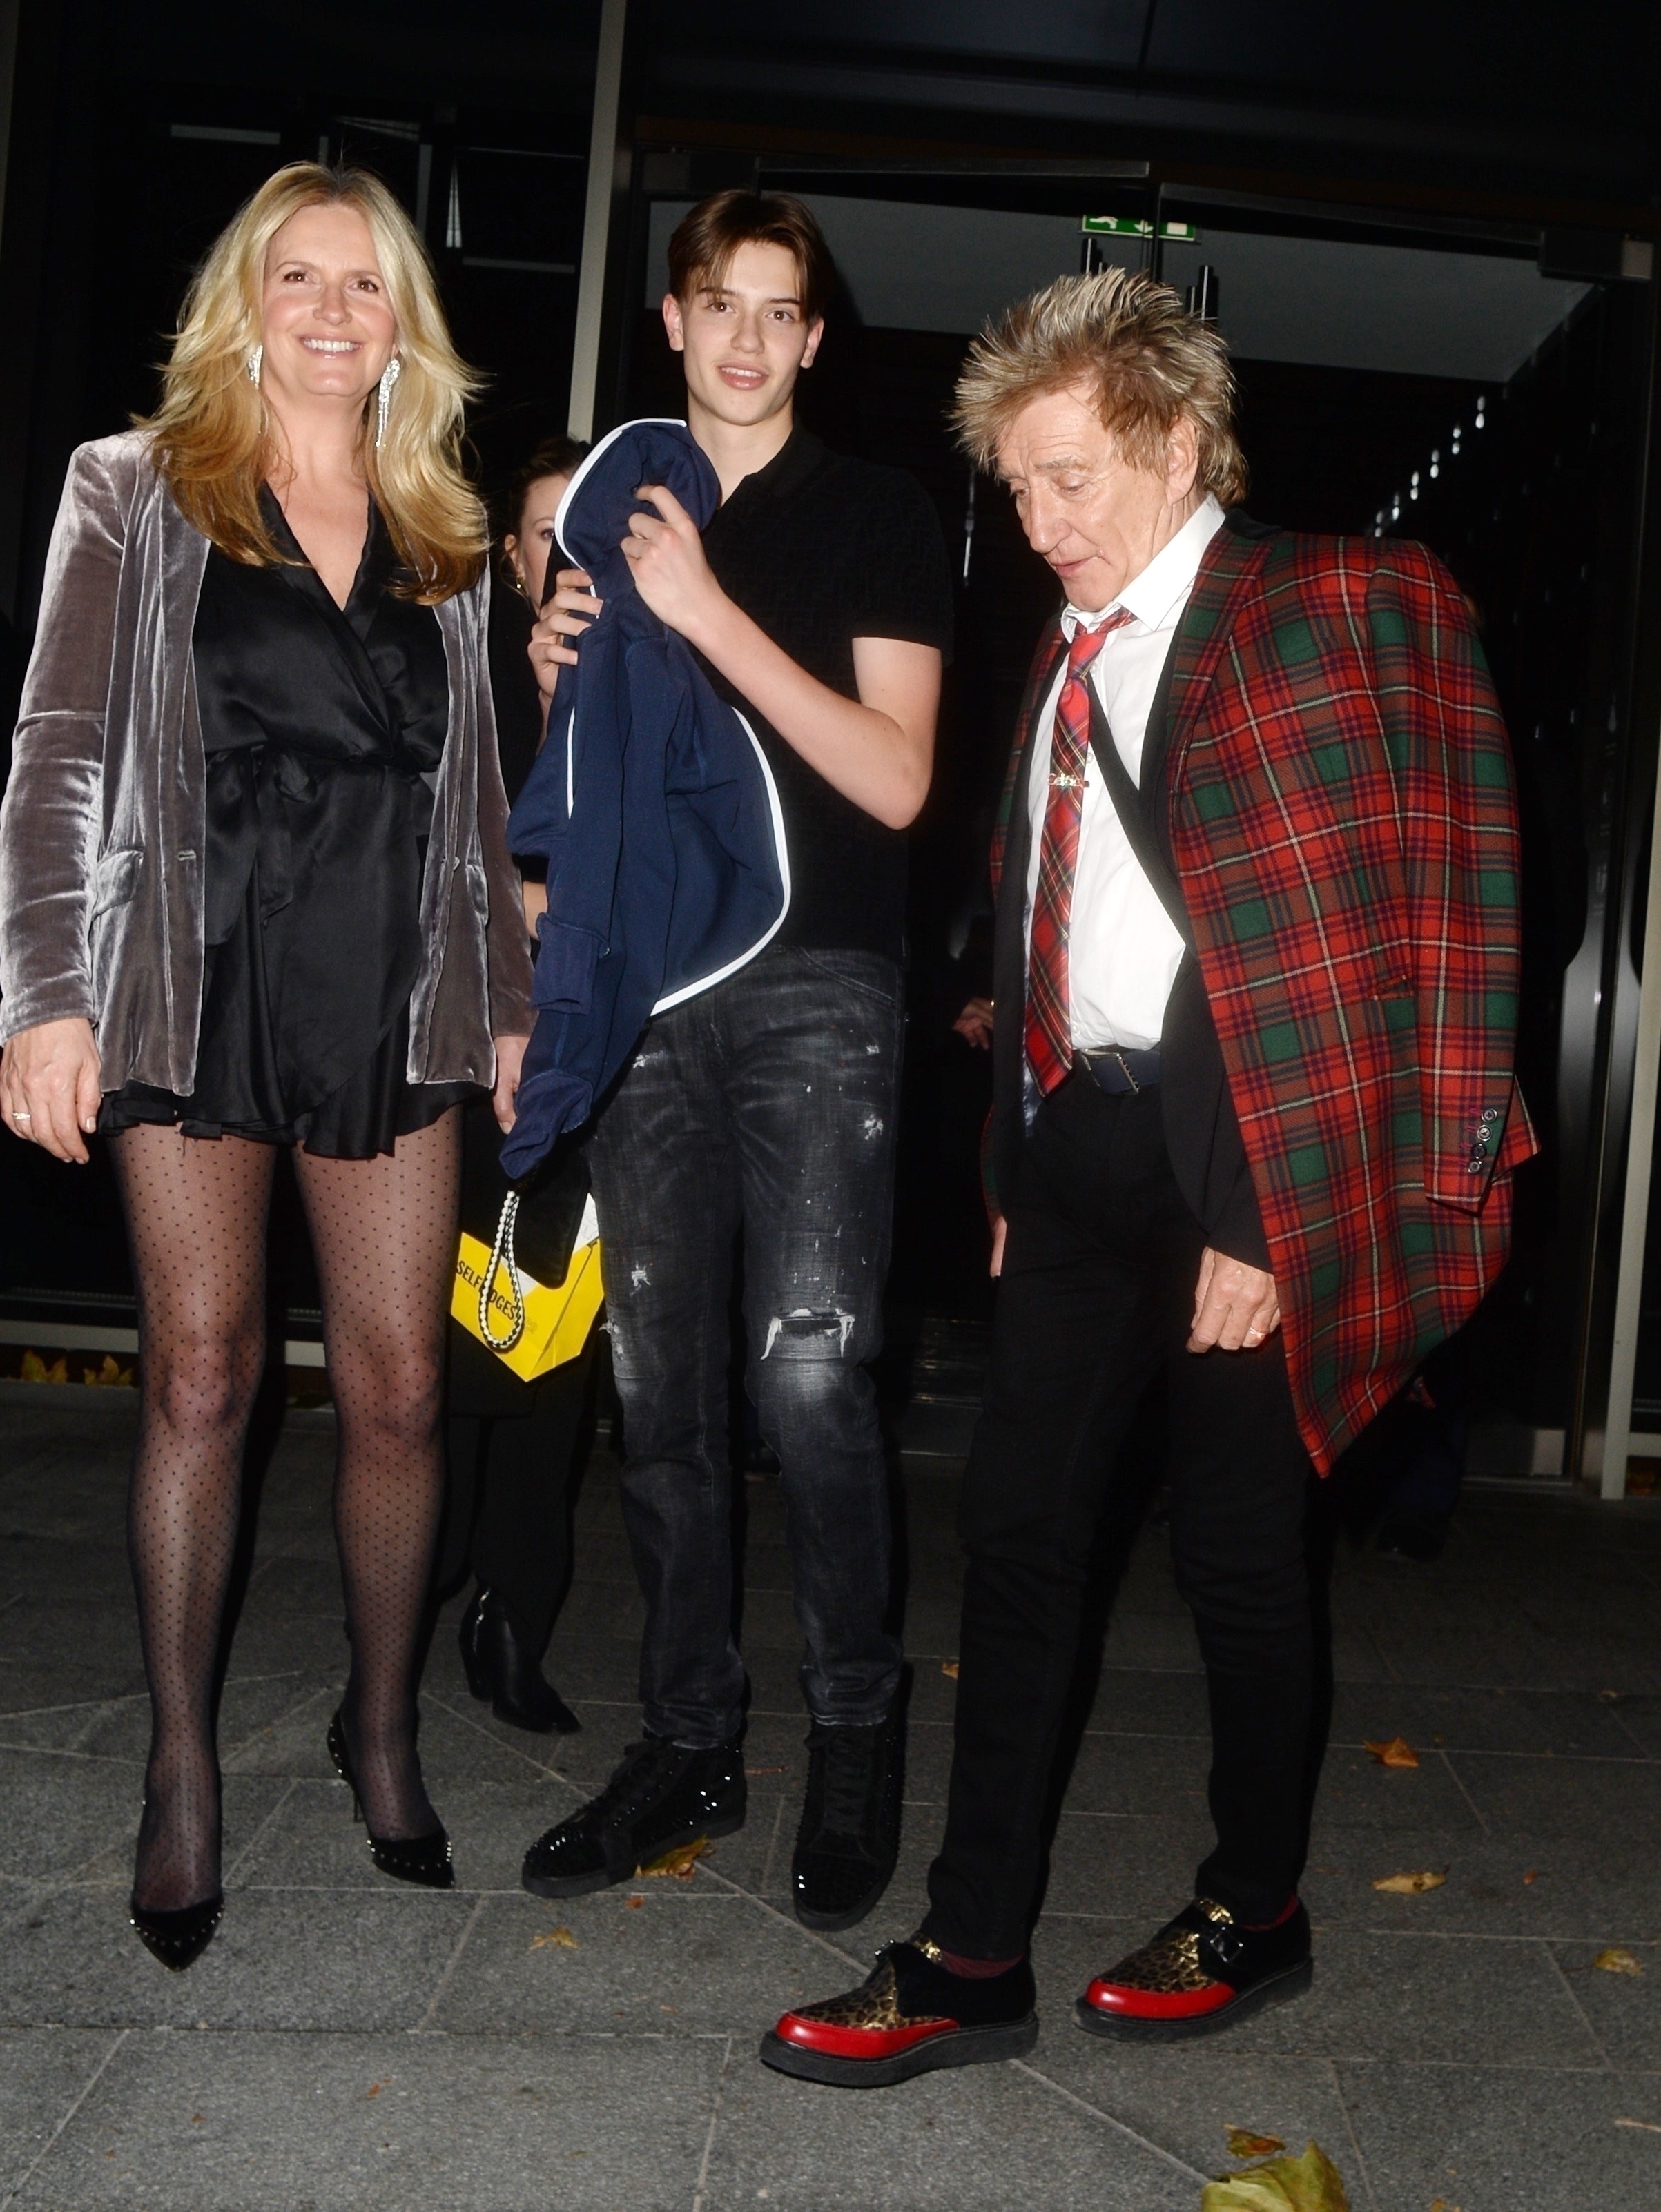 <p><span>Penny Lancaster and husband Rod Stewart took son Alastair (who was born in 2005) </span>out to dinner at Nobu in London on Nov. 27, 2021, to celebrate his 16th birthday (pictured). Penny shared a sweet <a href="https://www.instagram.com/p/CWynqT_vcp6/">photo</a> with her baby on<span> Instagram the same day, </span>captioning it, "My gorgeous boy turns 16 today, so proud of him." Penny and Rod are also parents to son Aiden (who was born in 2011). Rod also has six older children from previous relationships.</p>